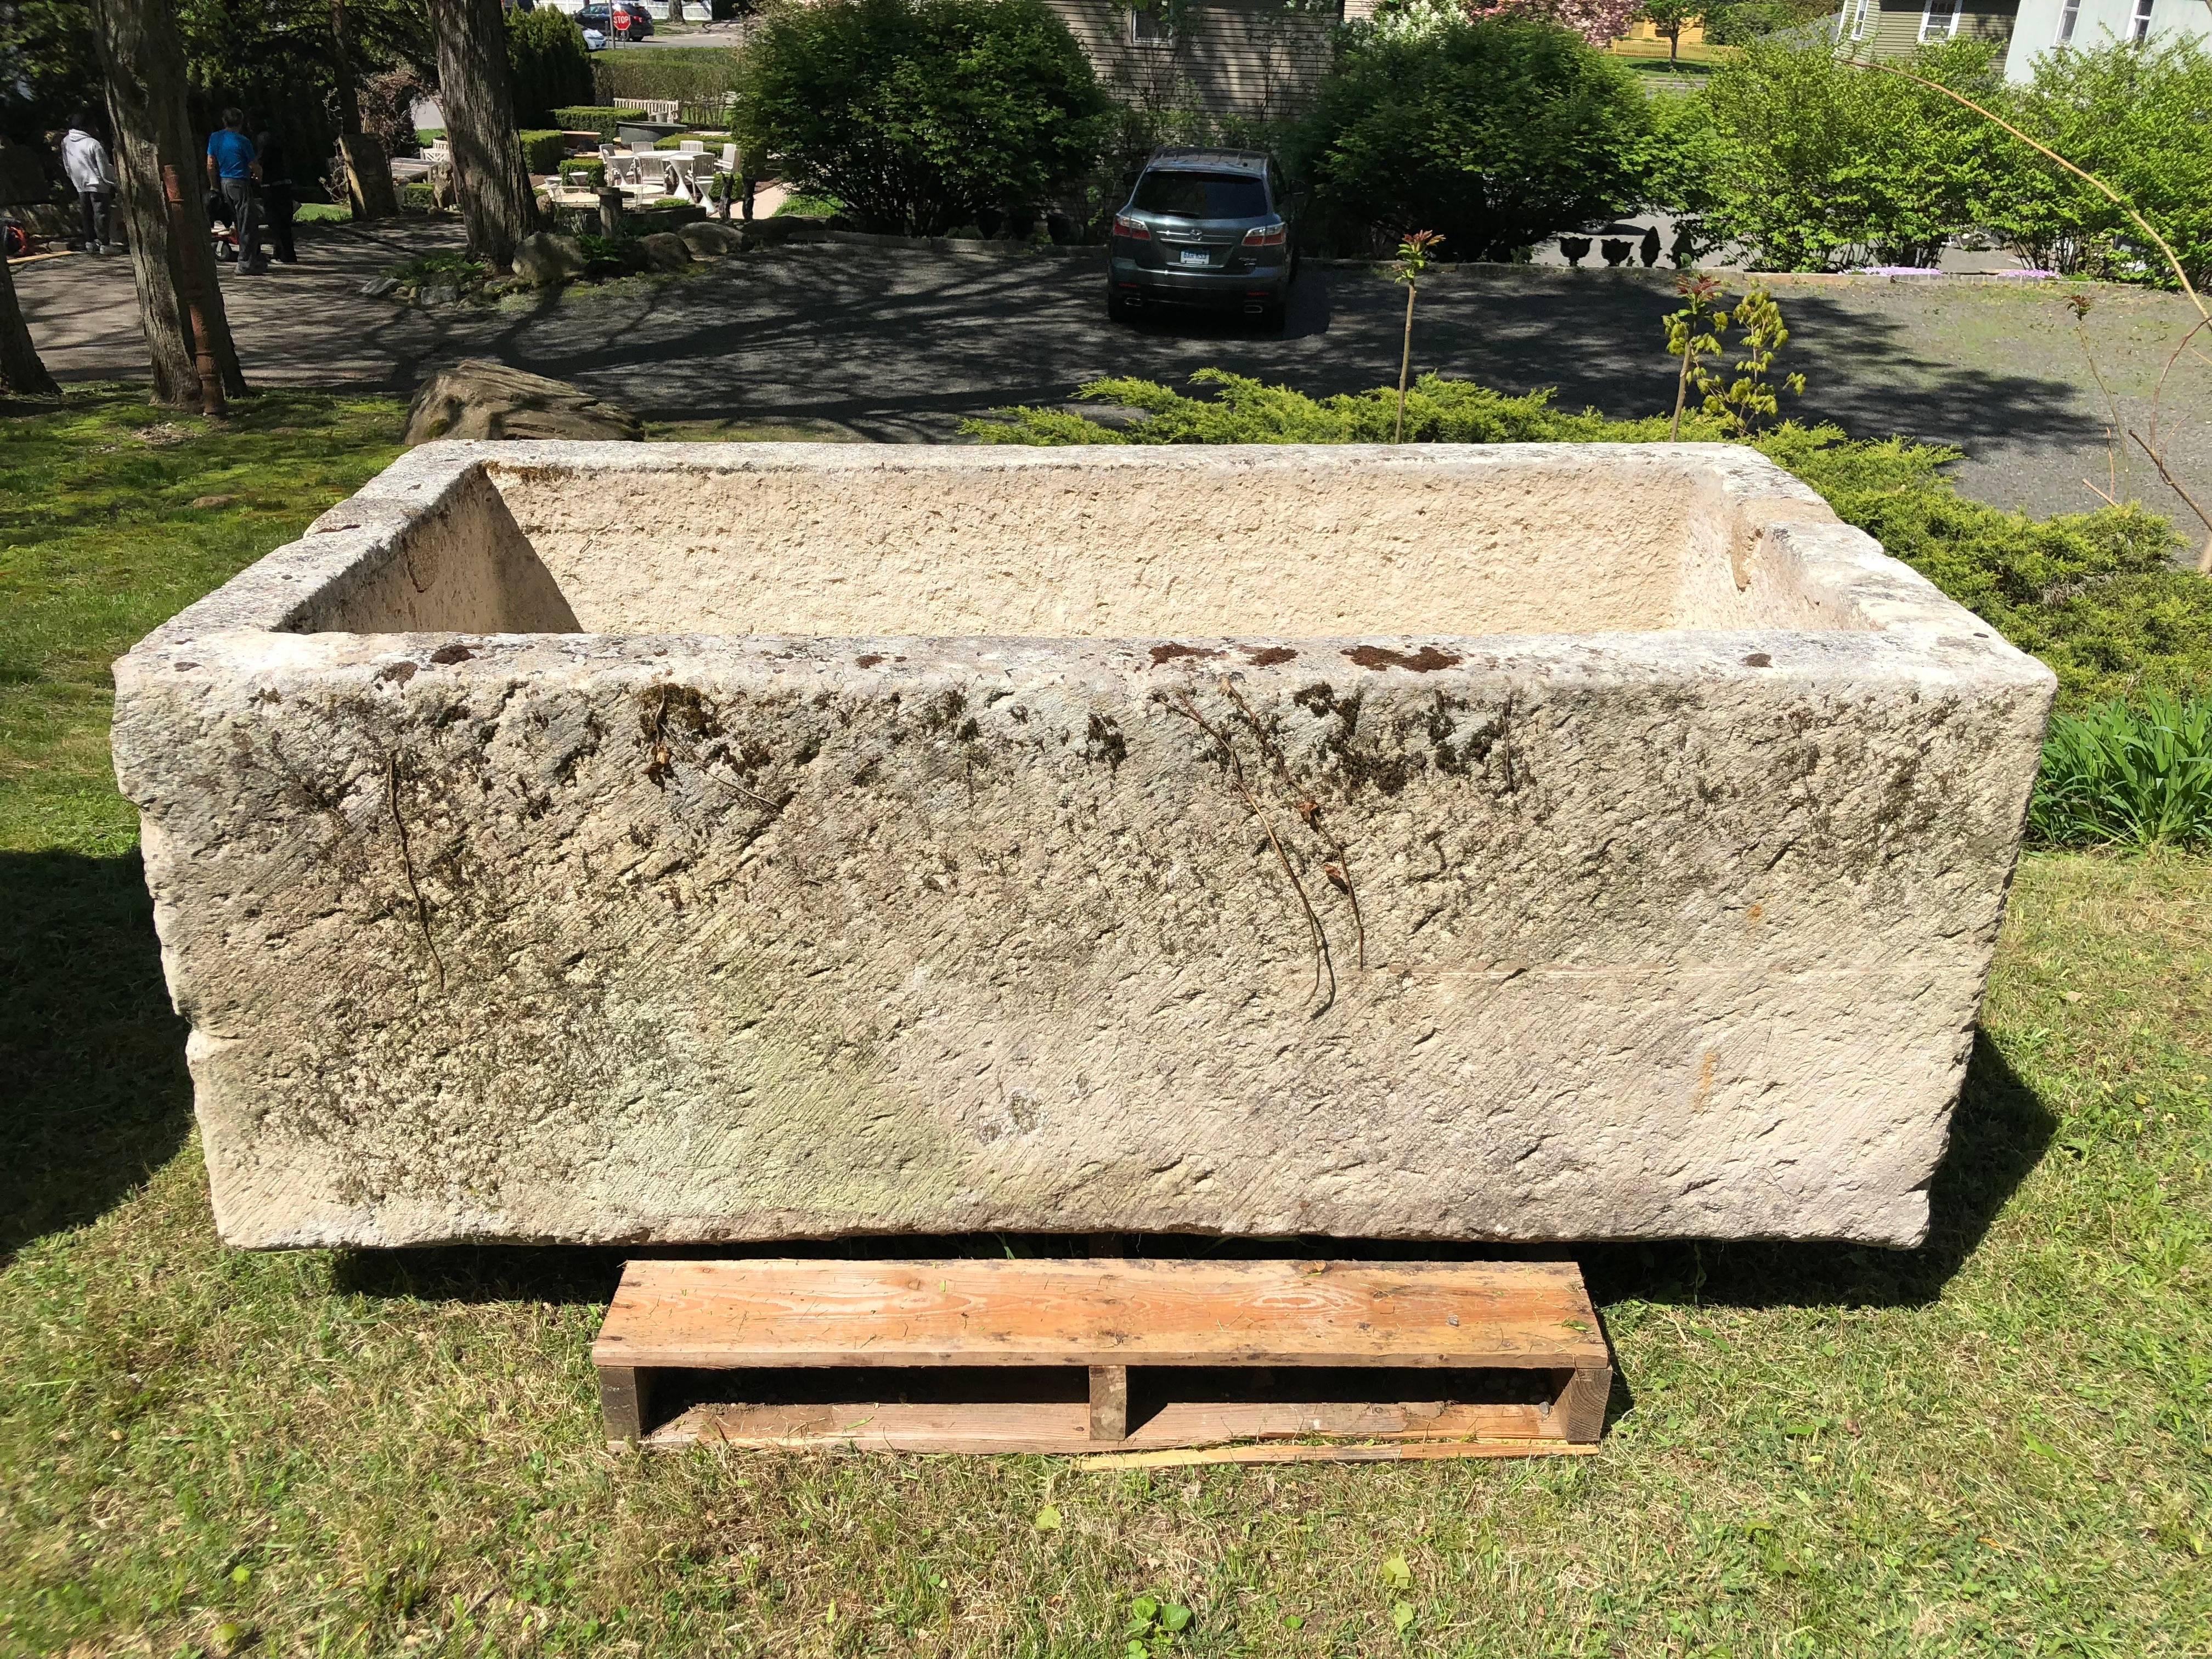 Our most recent buying trip yielded three magnificent and very large troughs, all hand-carved from thick limestone and in excellent condition. This one has darker long side to it, but overall, it has more gray to the coloration than is shown in the